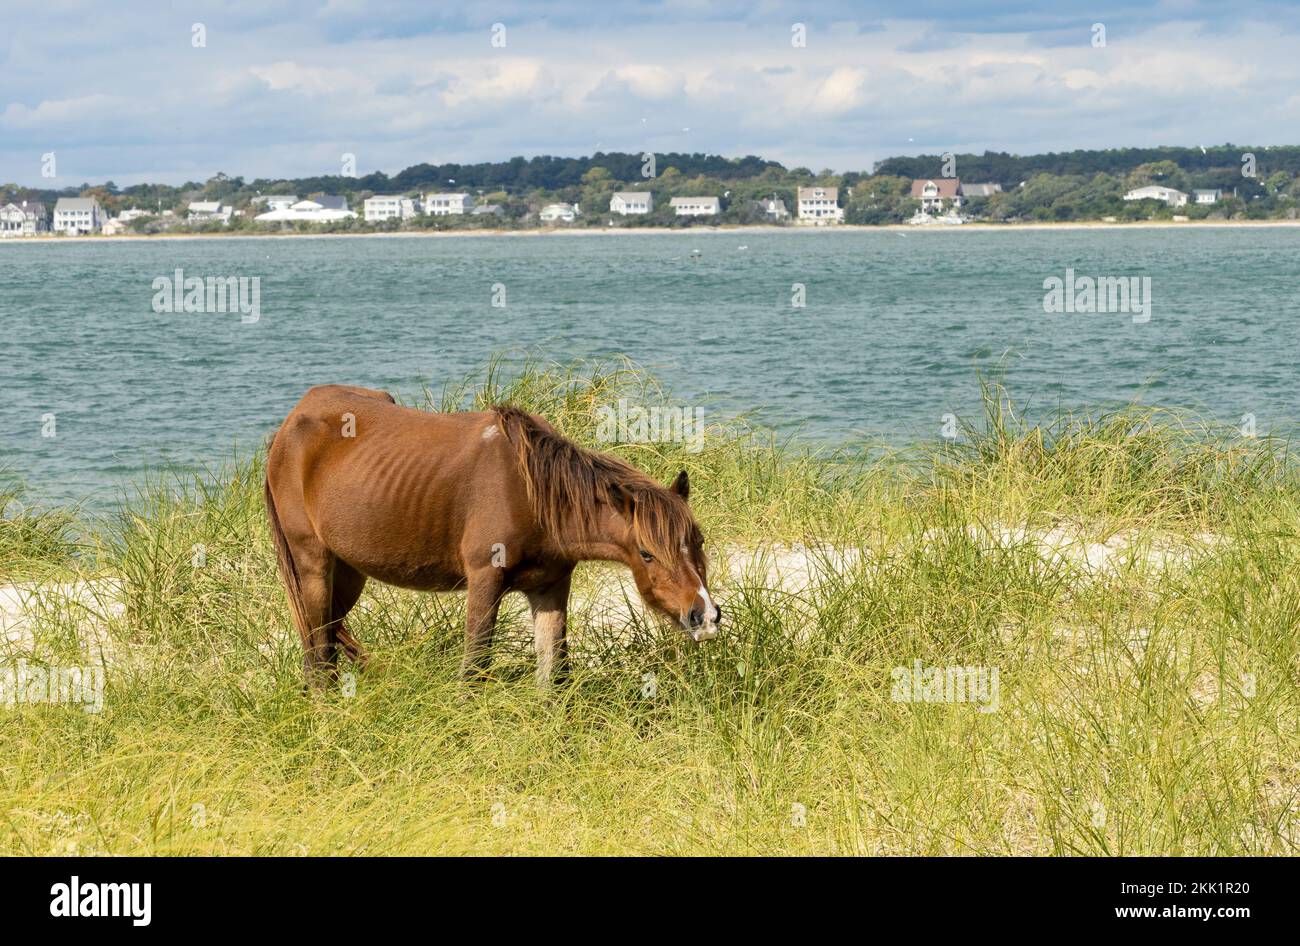 Wild horse (Equus ferus) grazing on coastal grassland near water with buildings in background Stock Photo